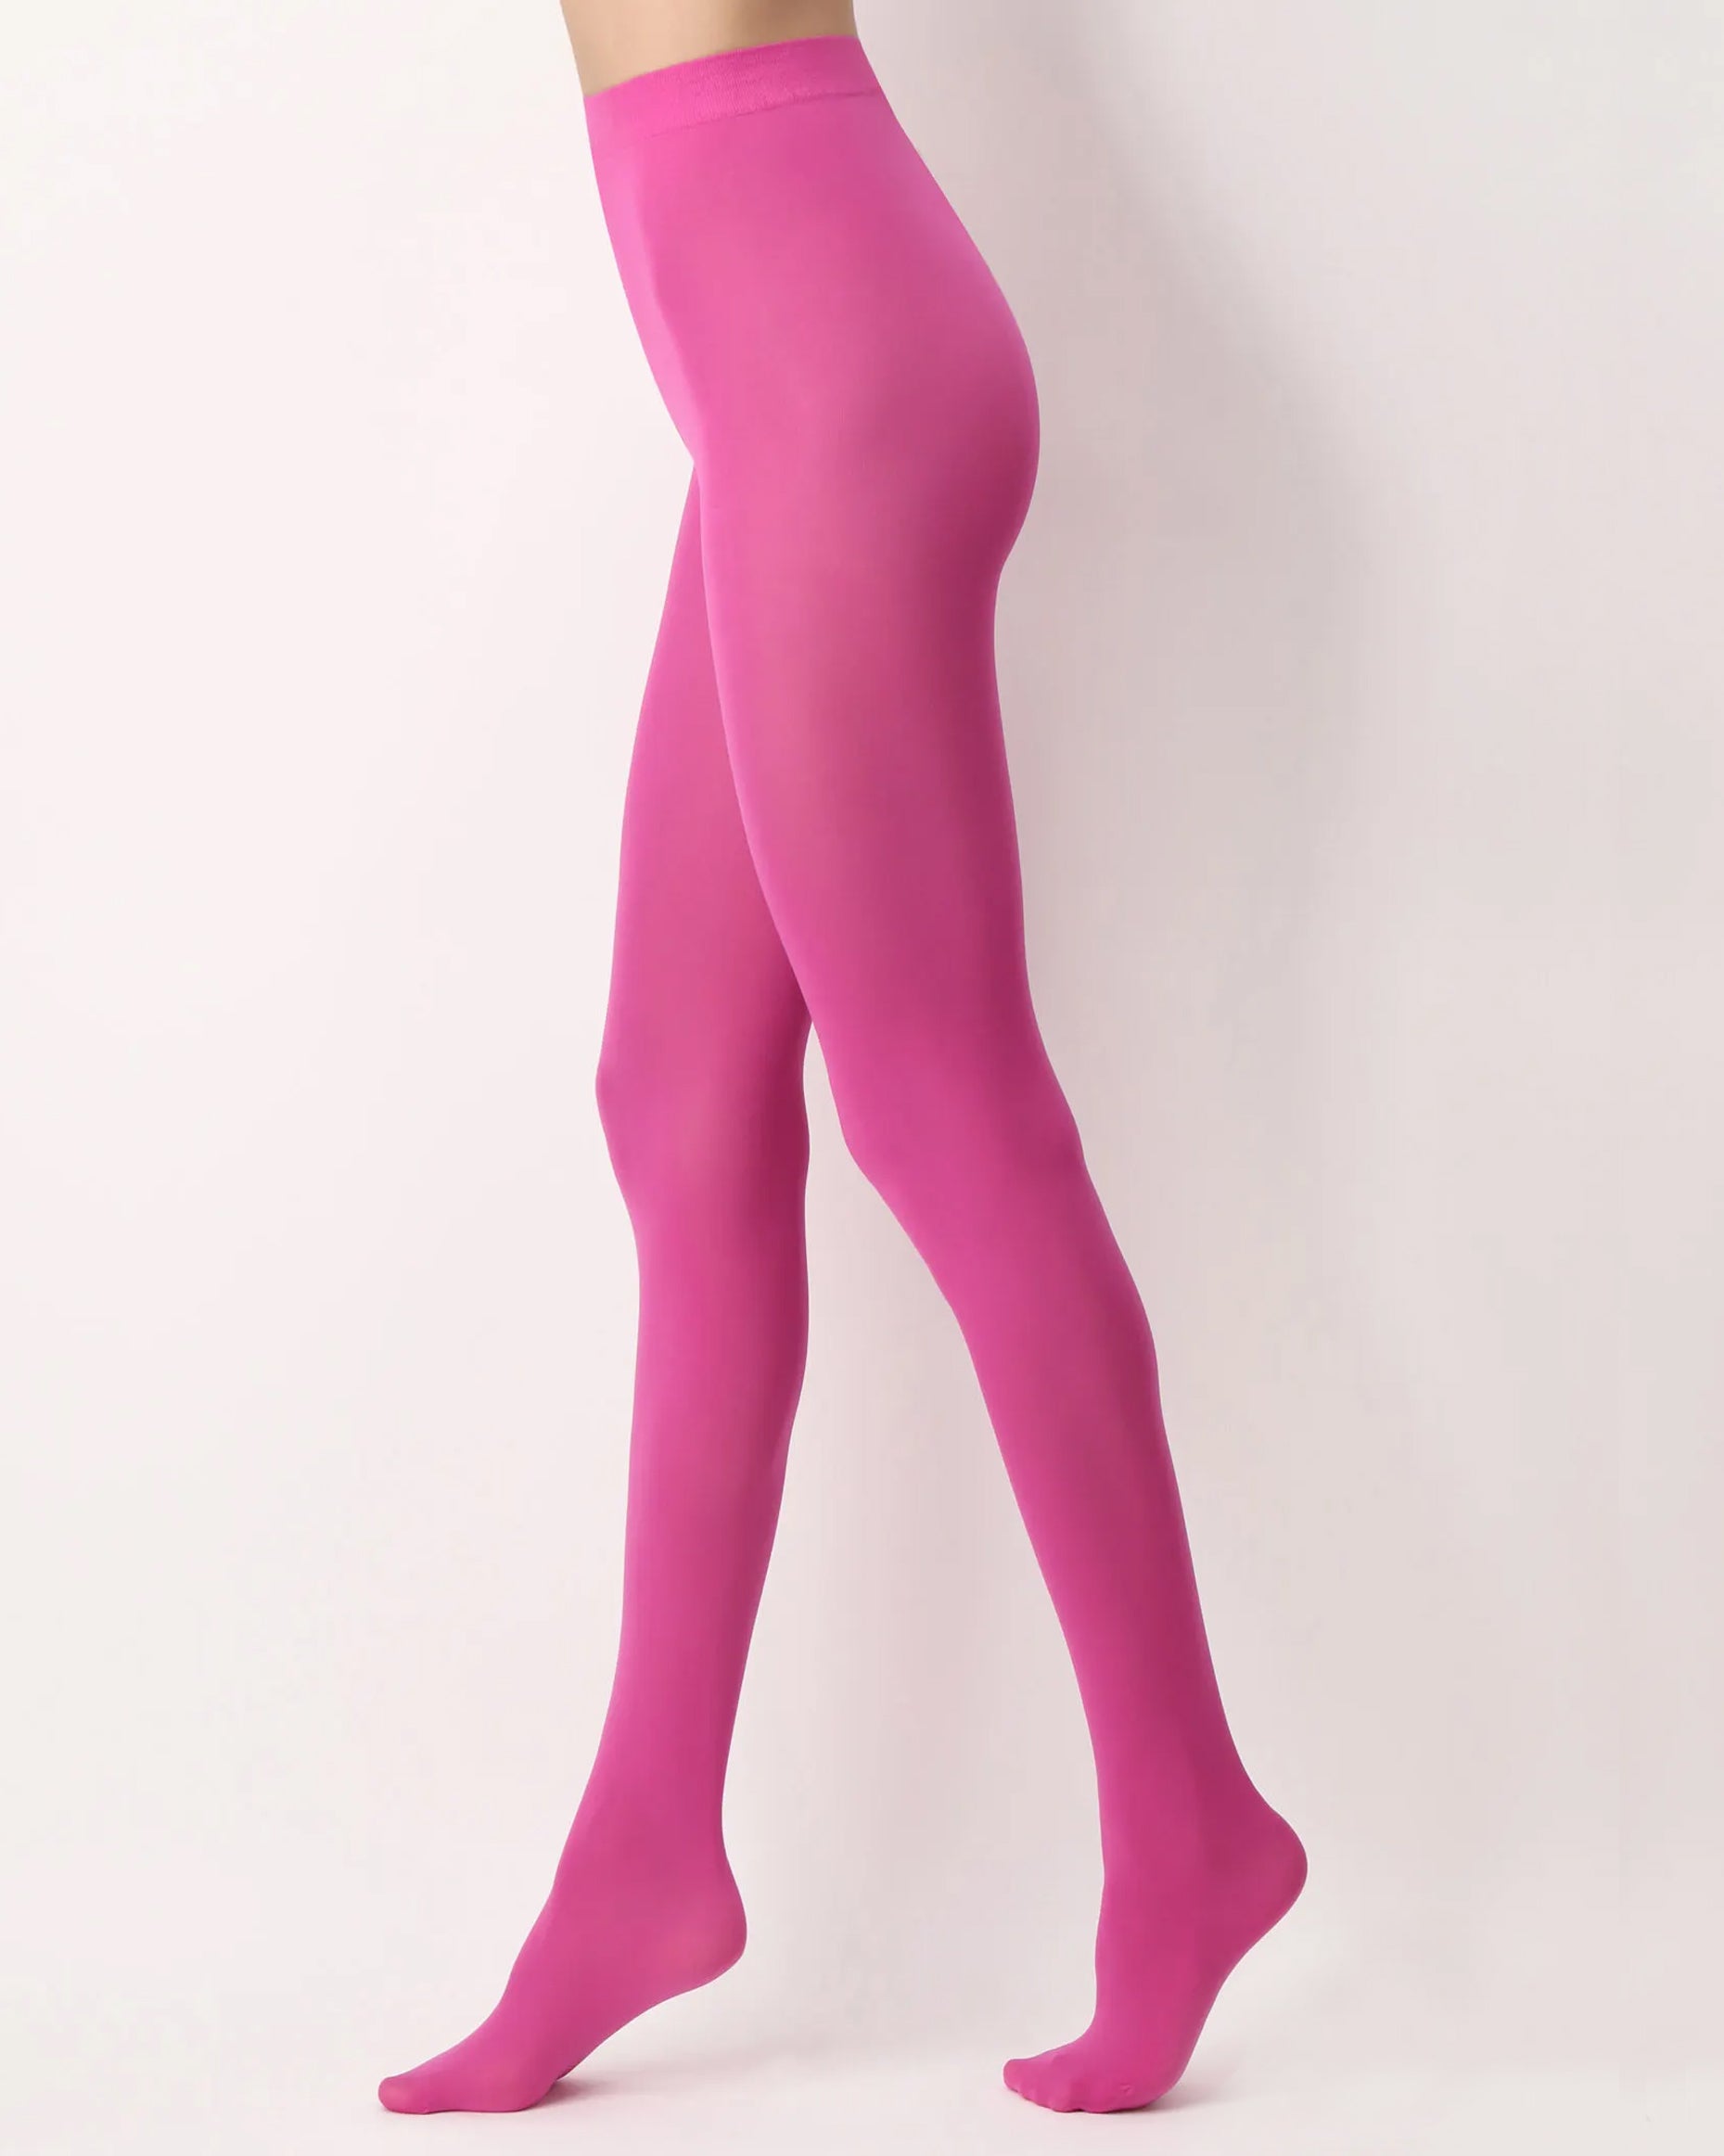 Oroblu All Colors 50 Den - Bright Barbie Pink (Glossy) microfibre opaque tights with cotton gusset, flat seams and deep comfort waistband.